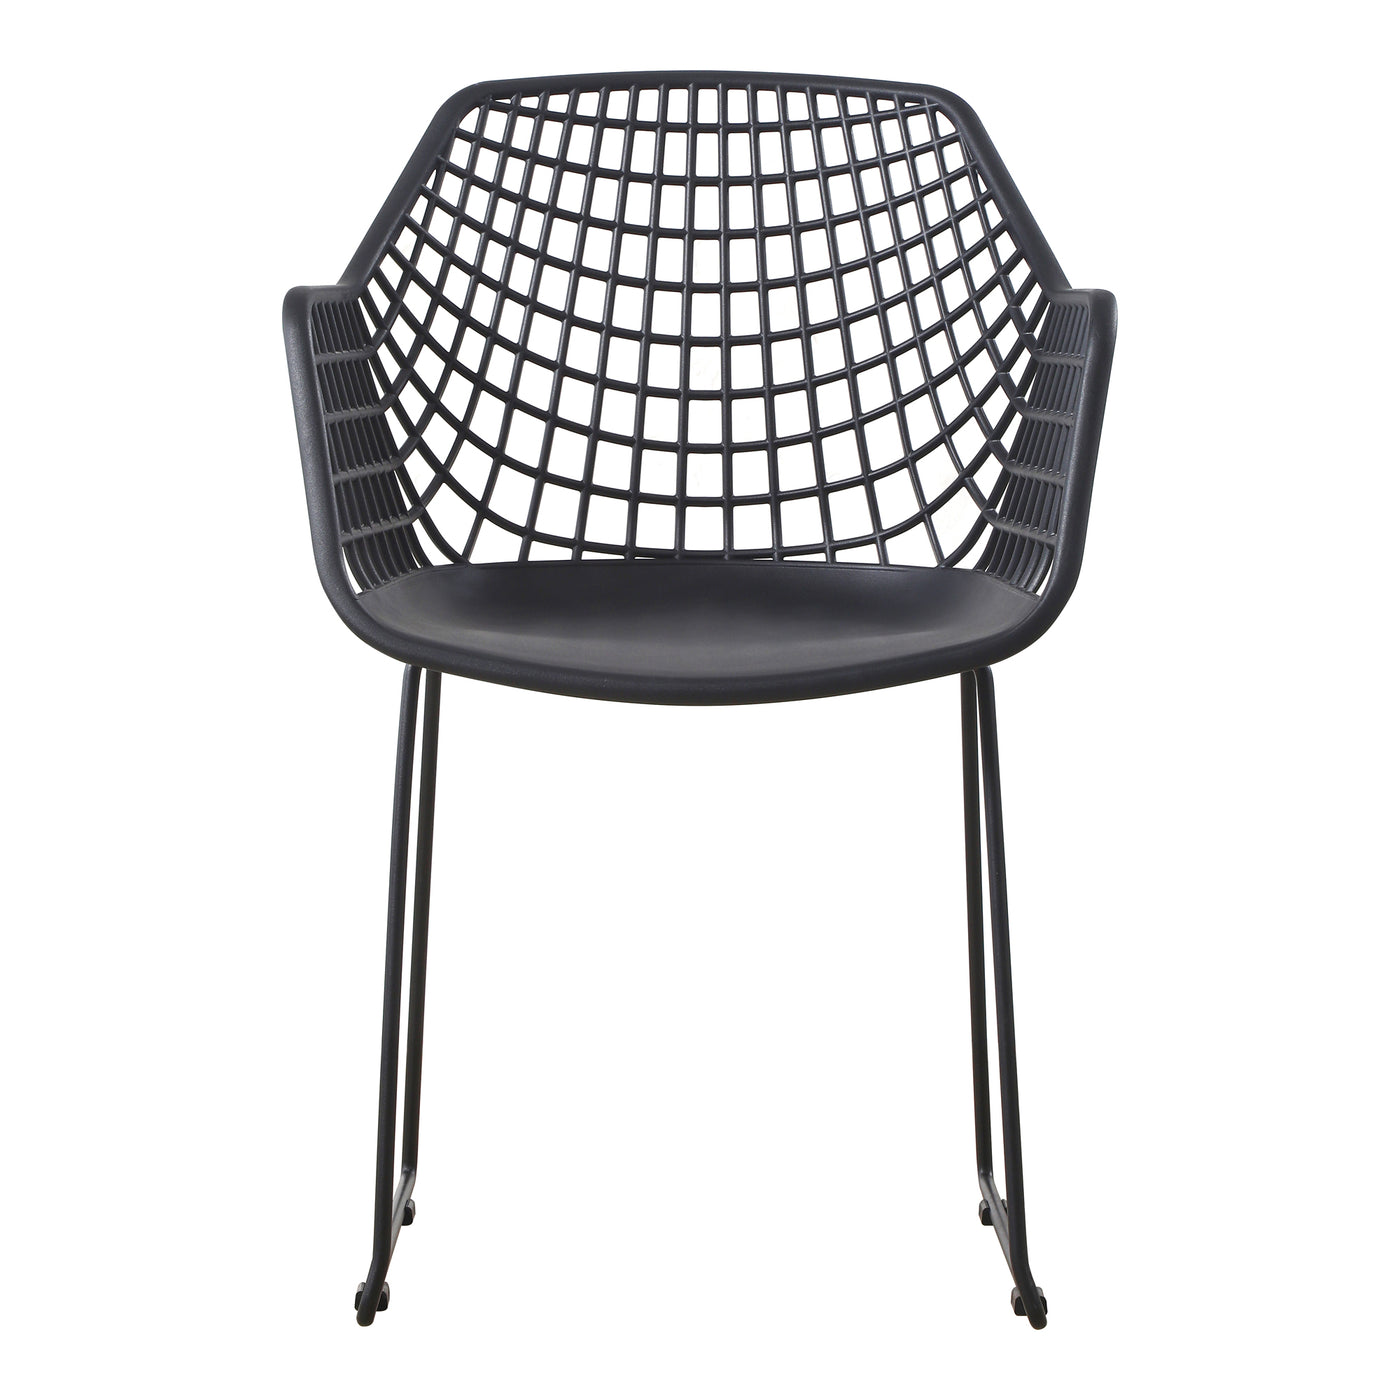 Functional for the indoors, but ideal for the outdoors. This slick, contemporary chair is patio perfection with its perfor...